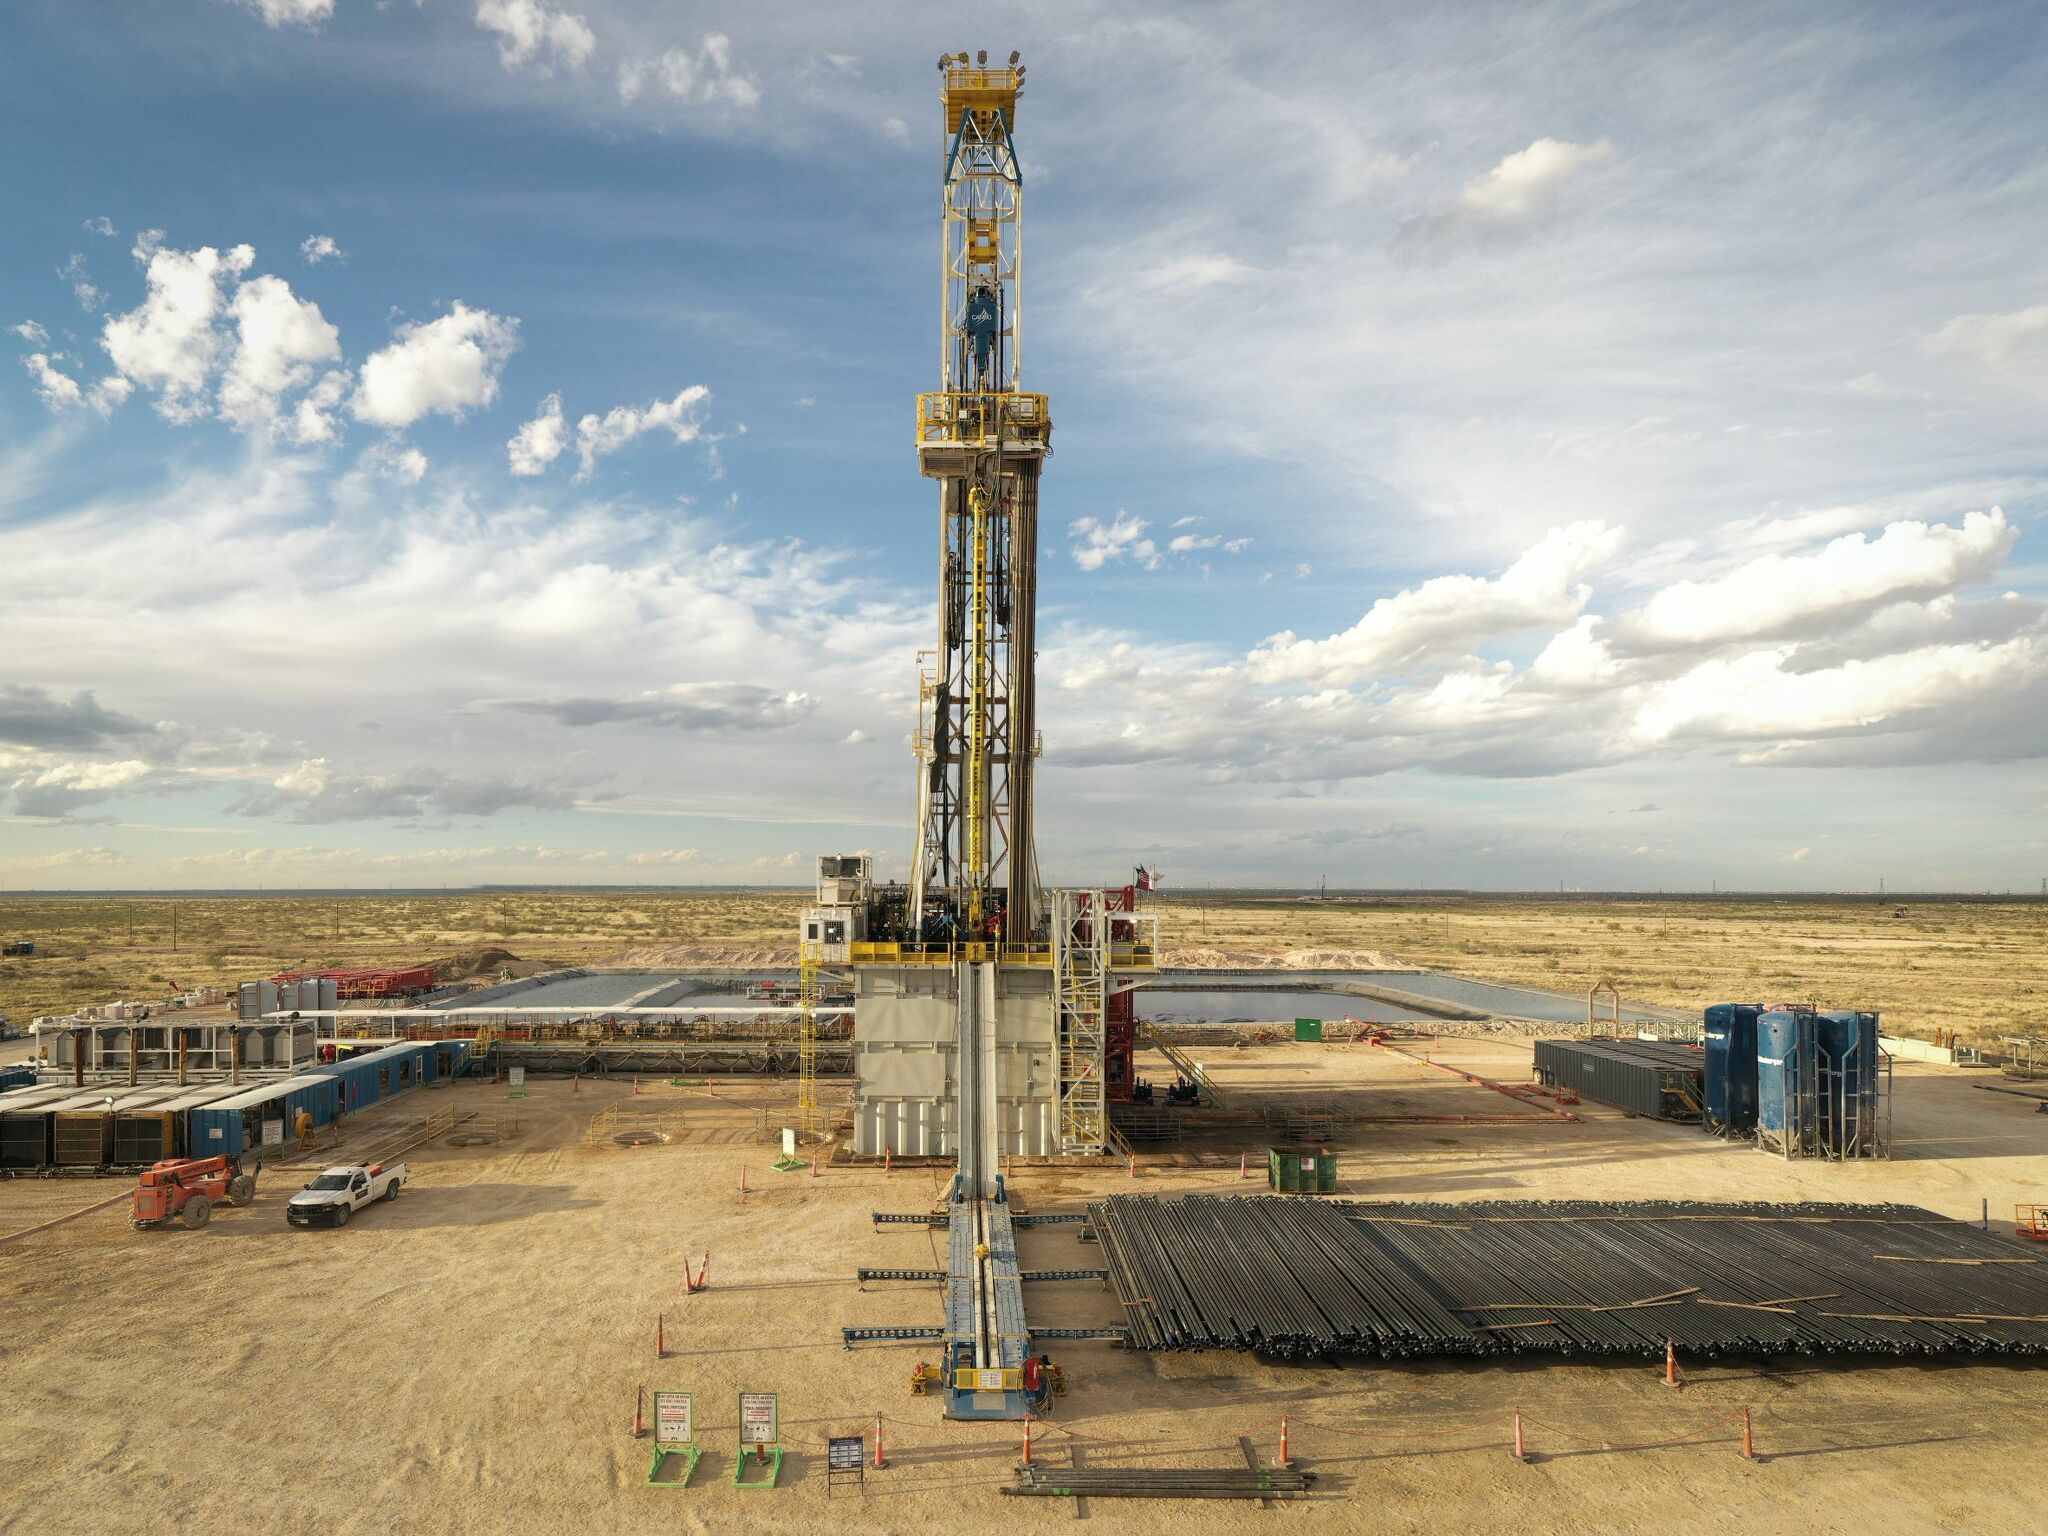 Nabors automates existing Permian Basin rig with robotics module